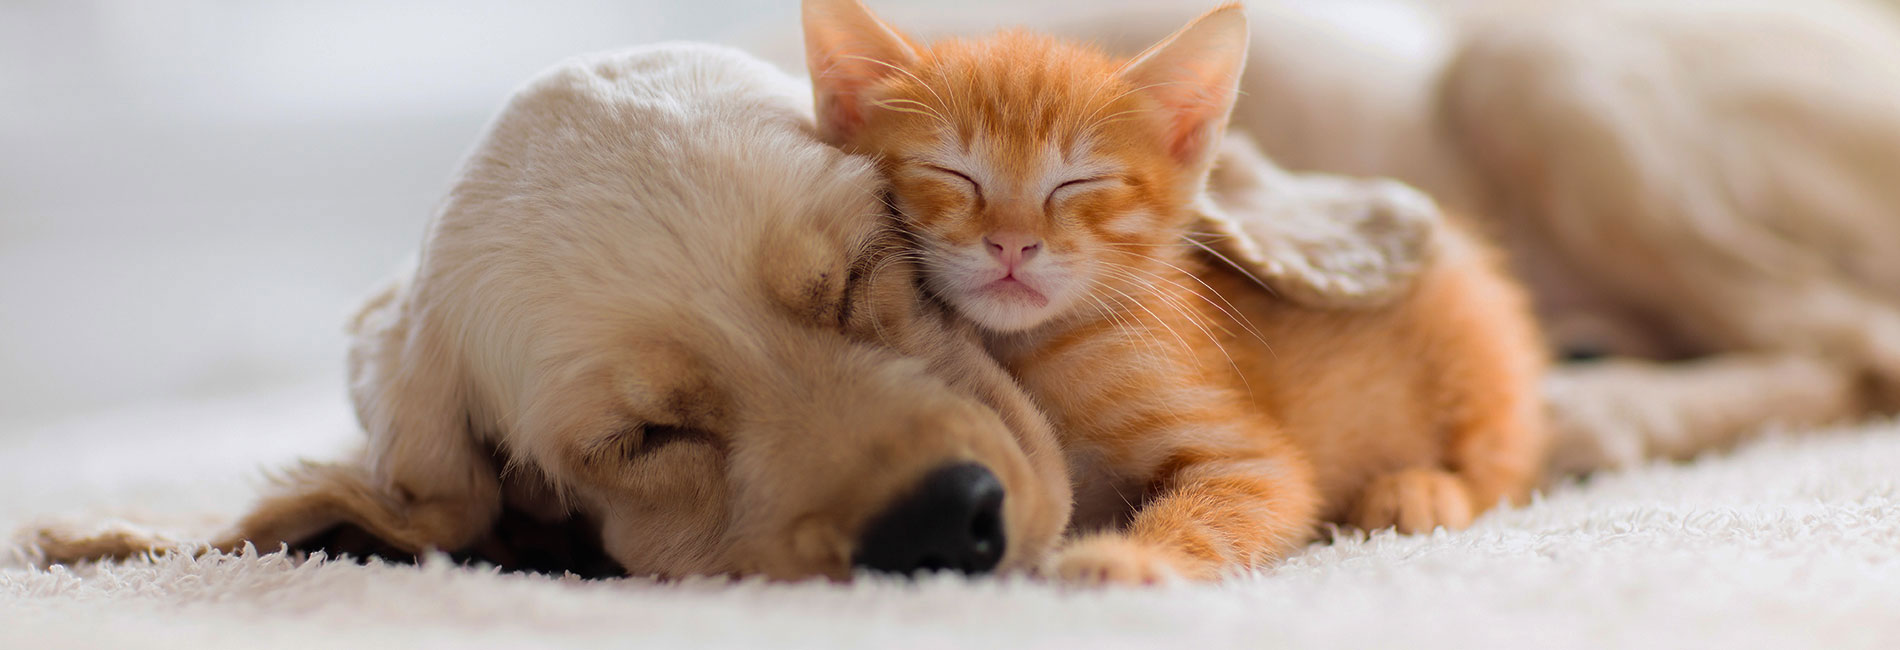 Pictured Cat and Dog Cuddling on the Bed